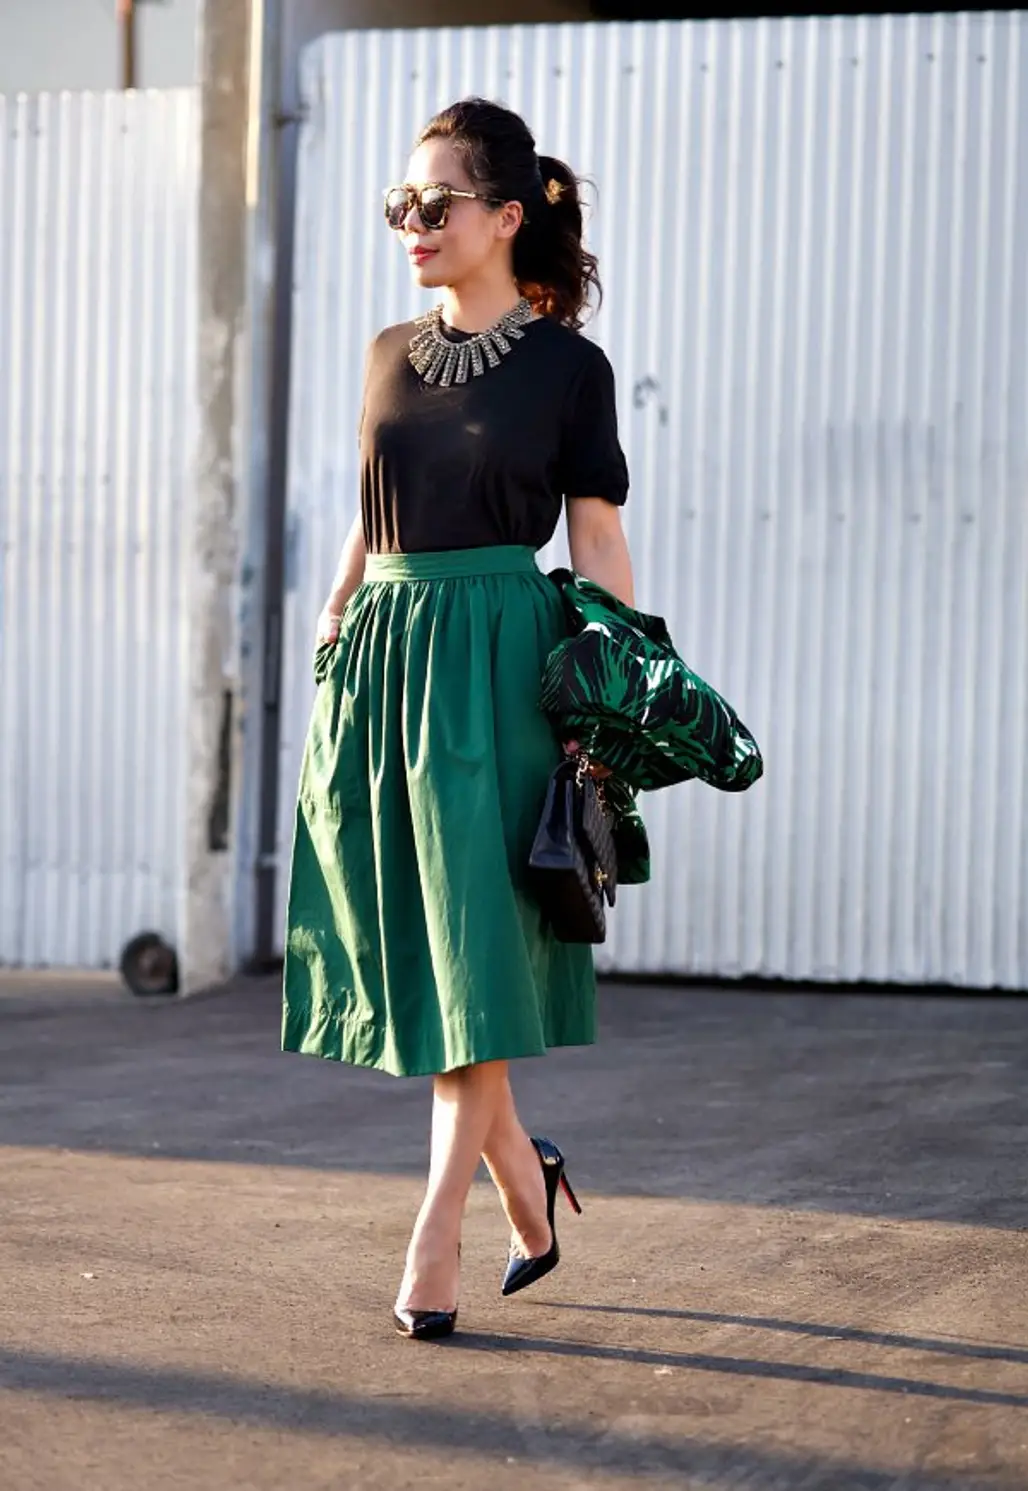 Are You a Taurus Woman? You'll Love These Stylish Outfit Ideas